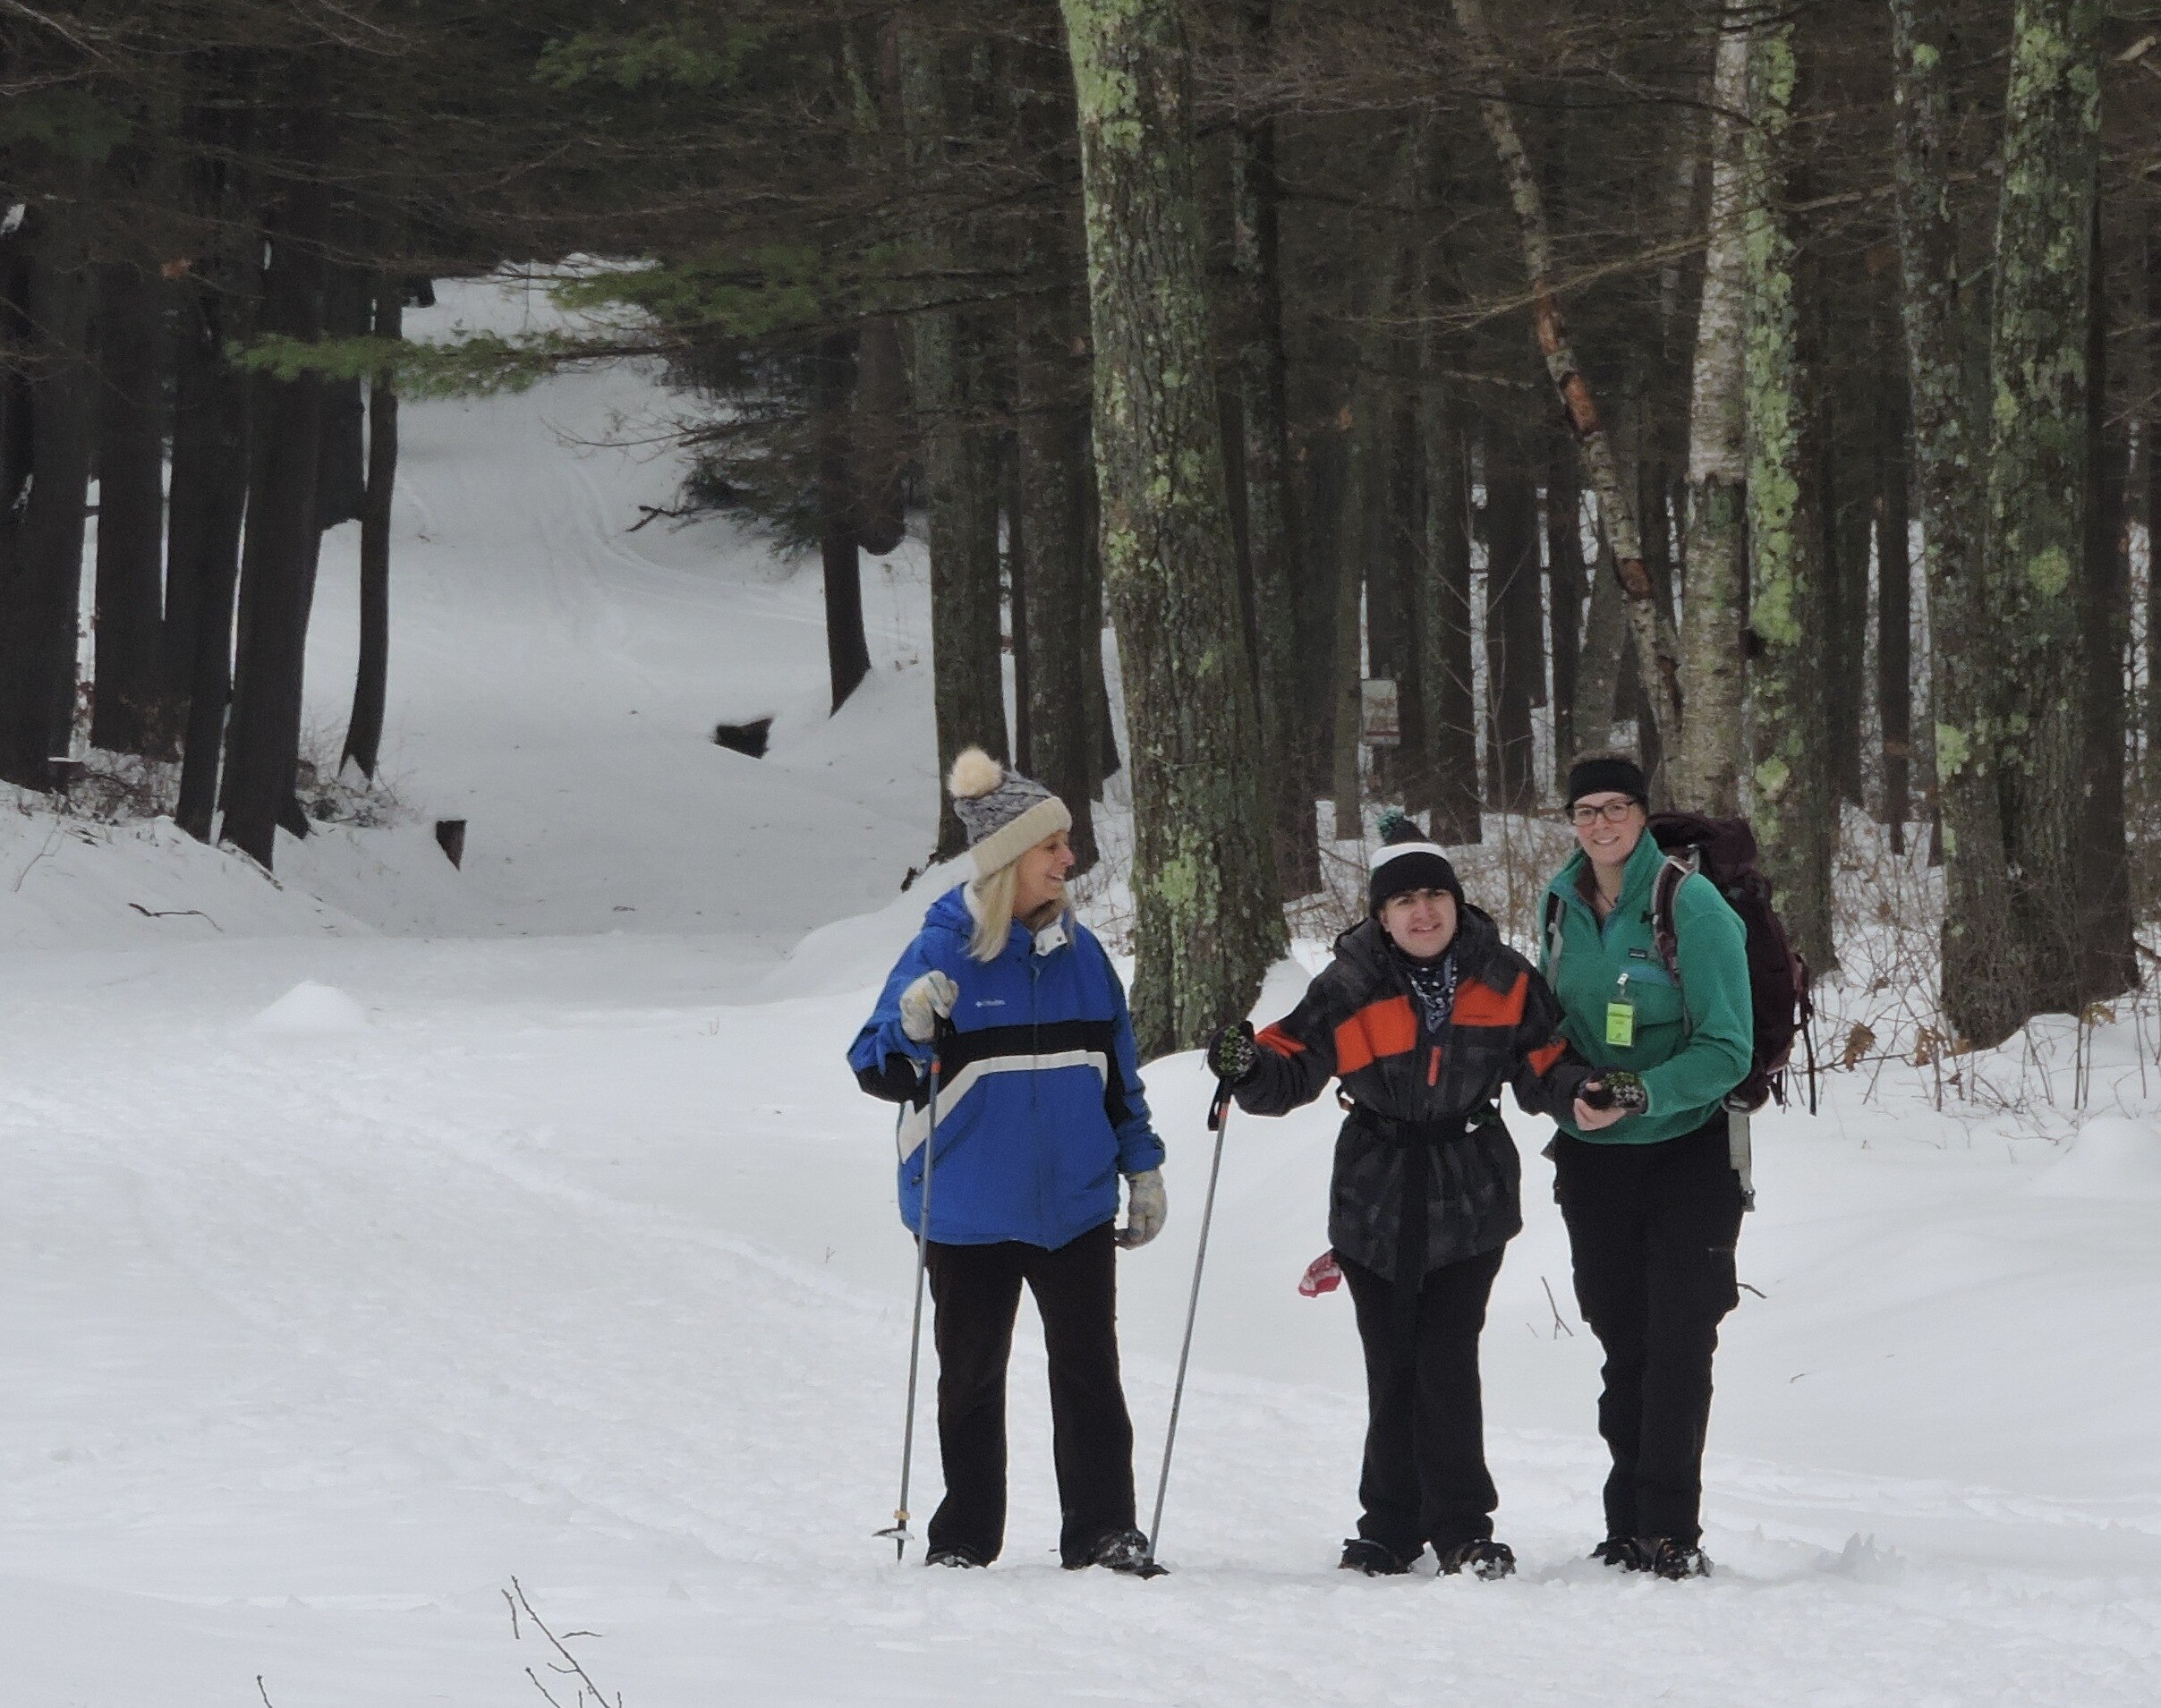 A picture of three smiling people standing in the snow in winter clothes with trees behind them. Two are holding hiking poles. 